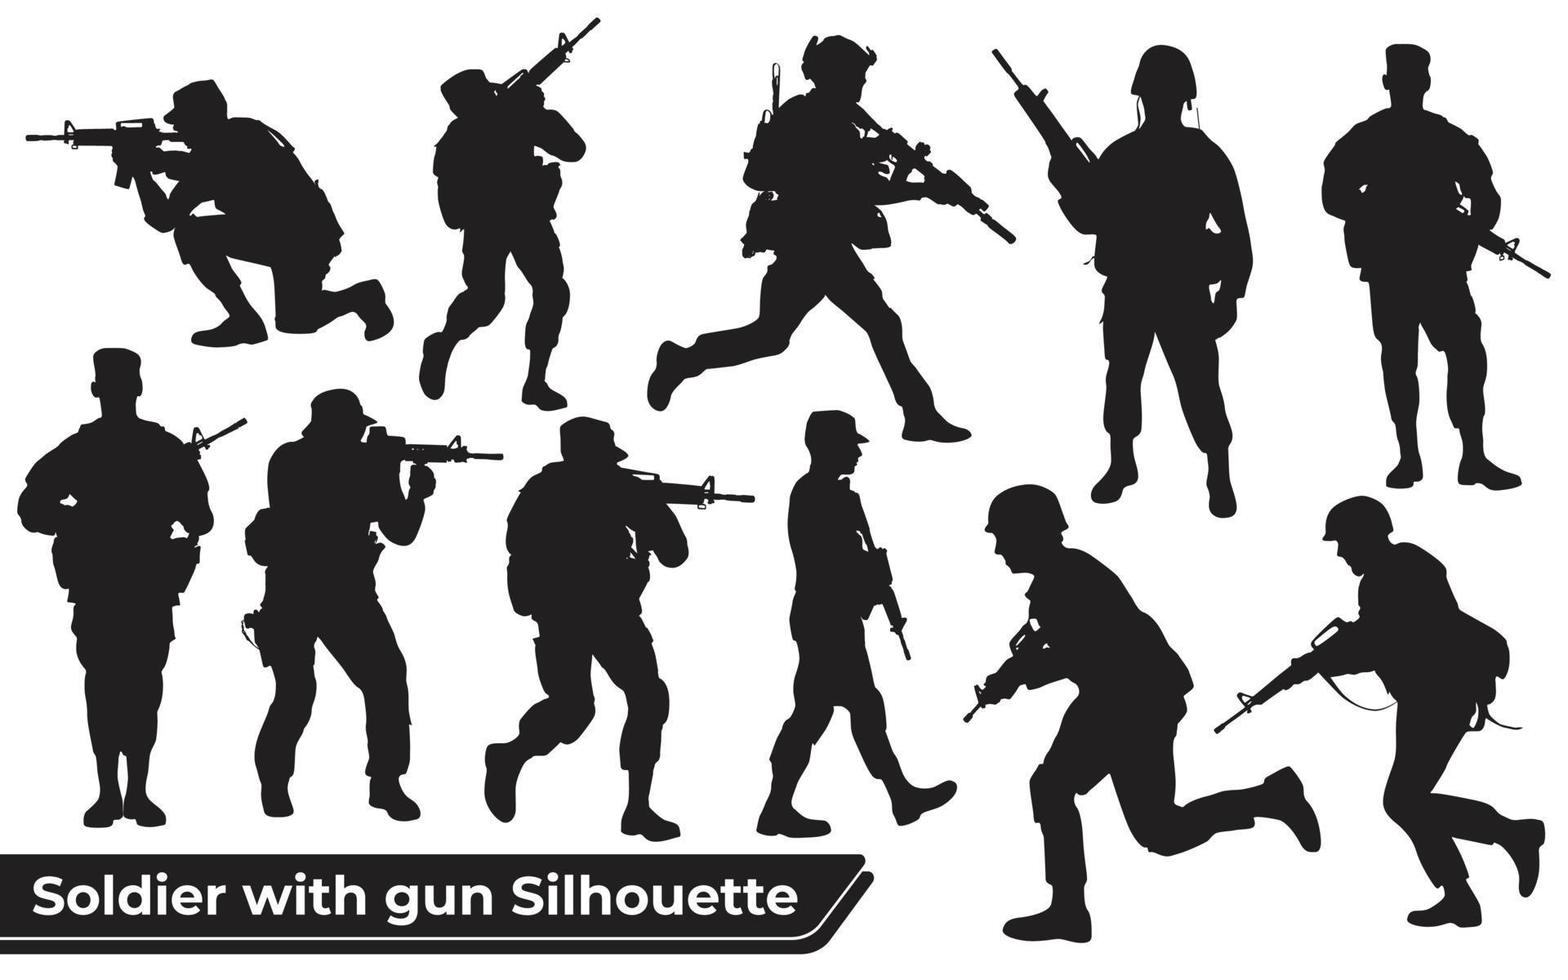 Collection of Soldier with gun silhouettes in different poses vector